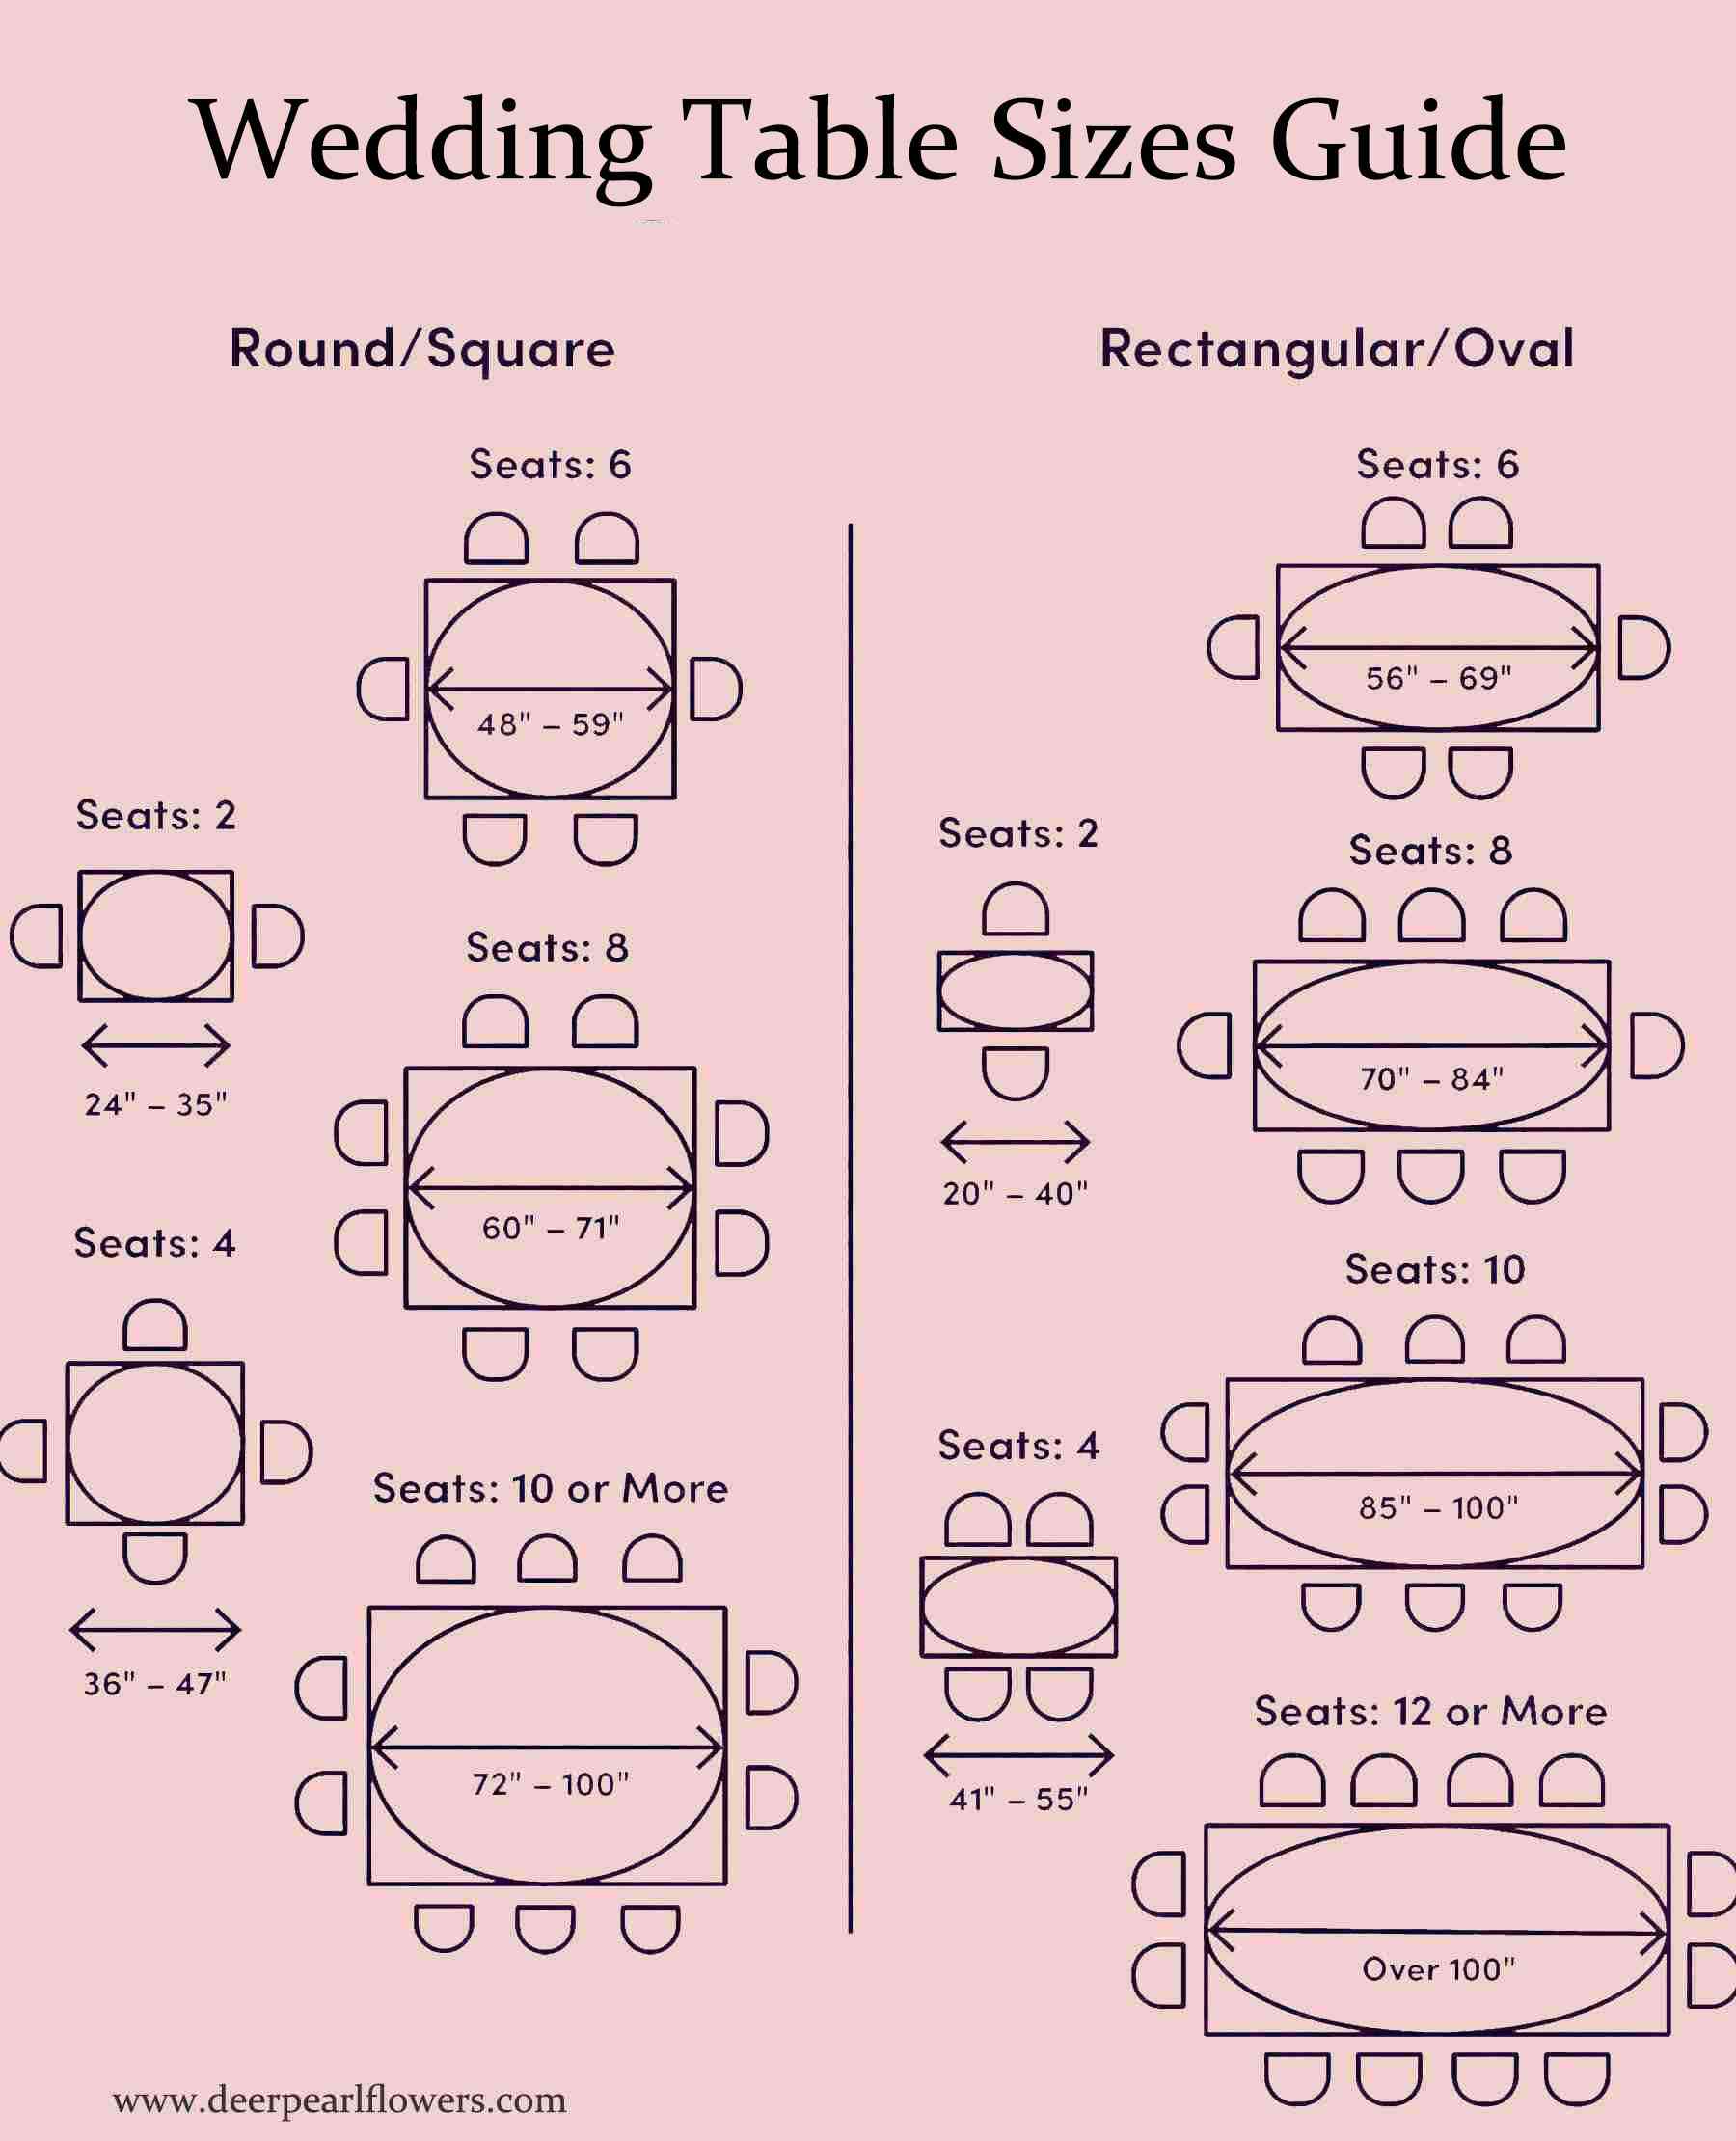 wedding seating size chart wedding table sizes guide